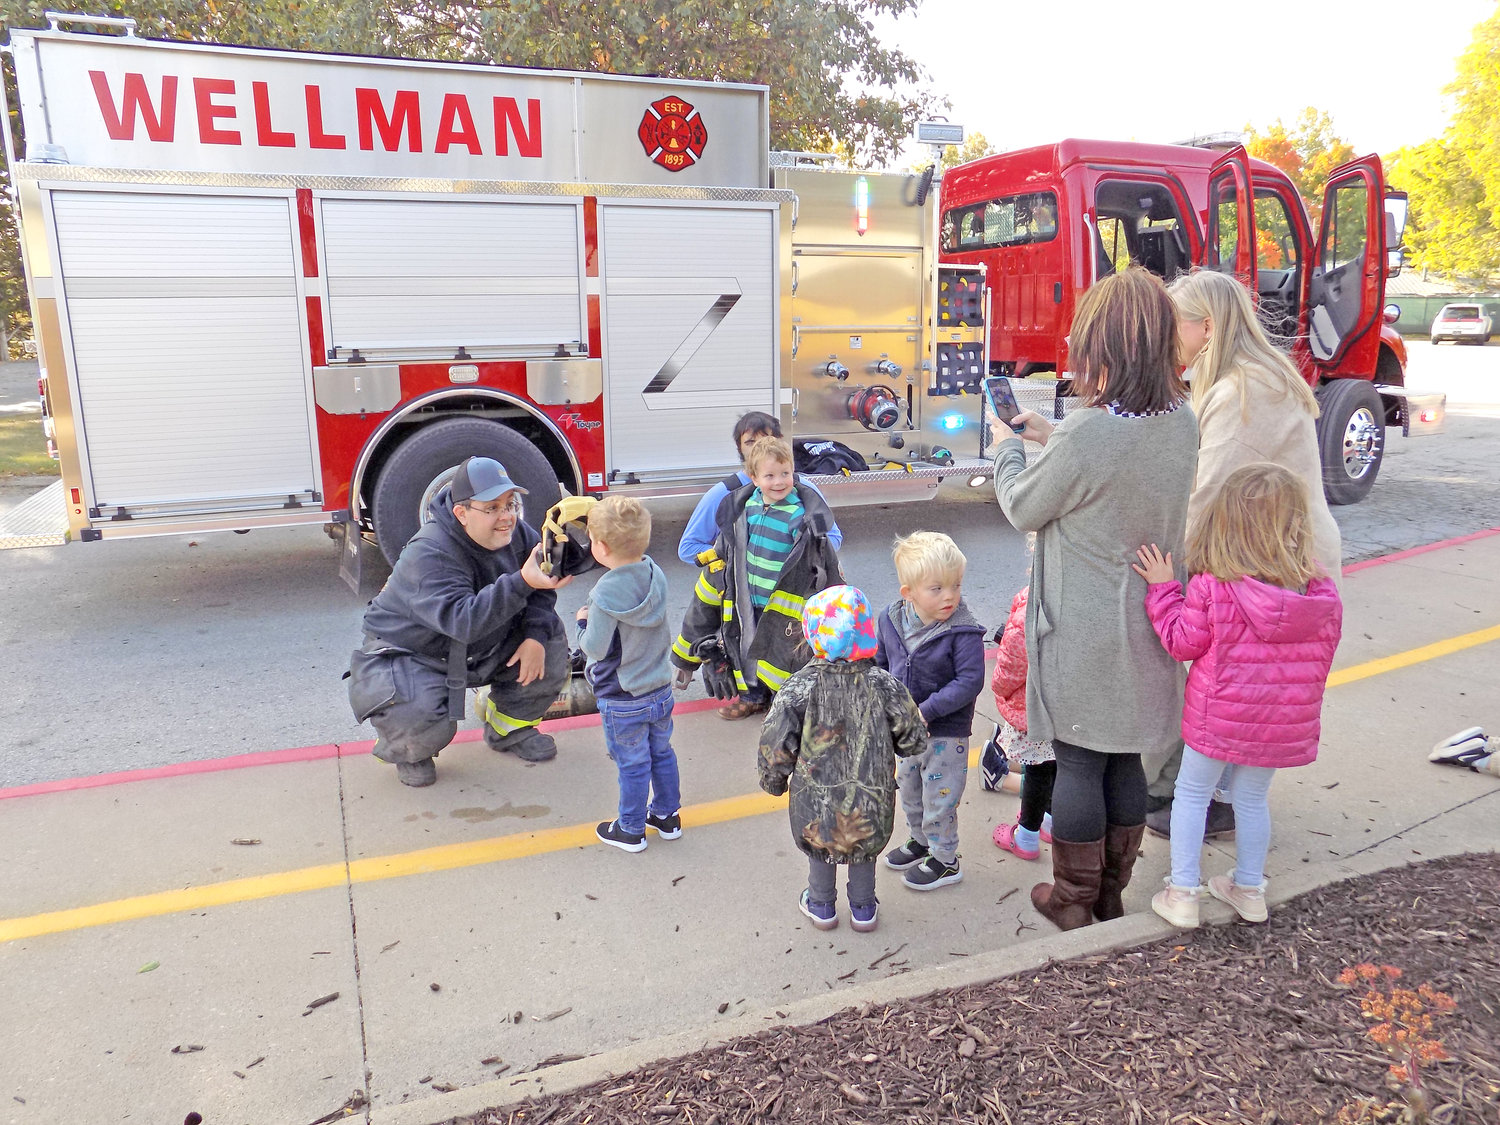 Wellman volunteer firefighters Tony Rios and Stone Peck visited M-P West Elementary on Oct. 13 with their new pumper truck.